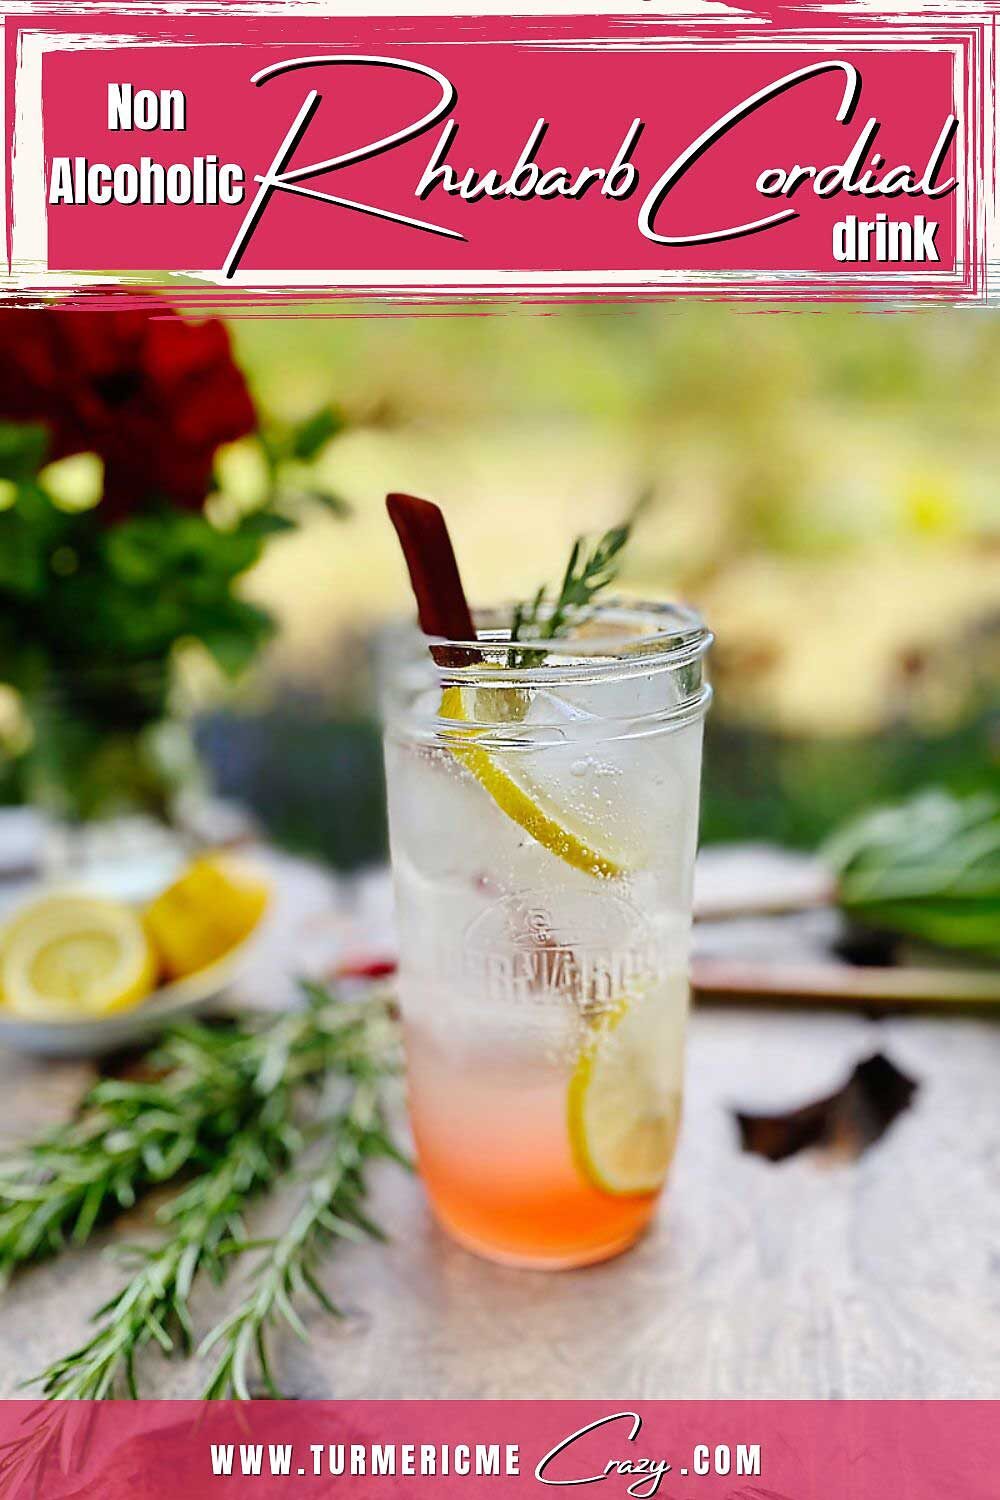 This quick & easy Rhubarb Cordial Lemonade is so delightfully refreshing and delicious! It’s another great way to cool down this summer and a fantastic use of all that fresh garden rhubarb!